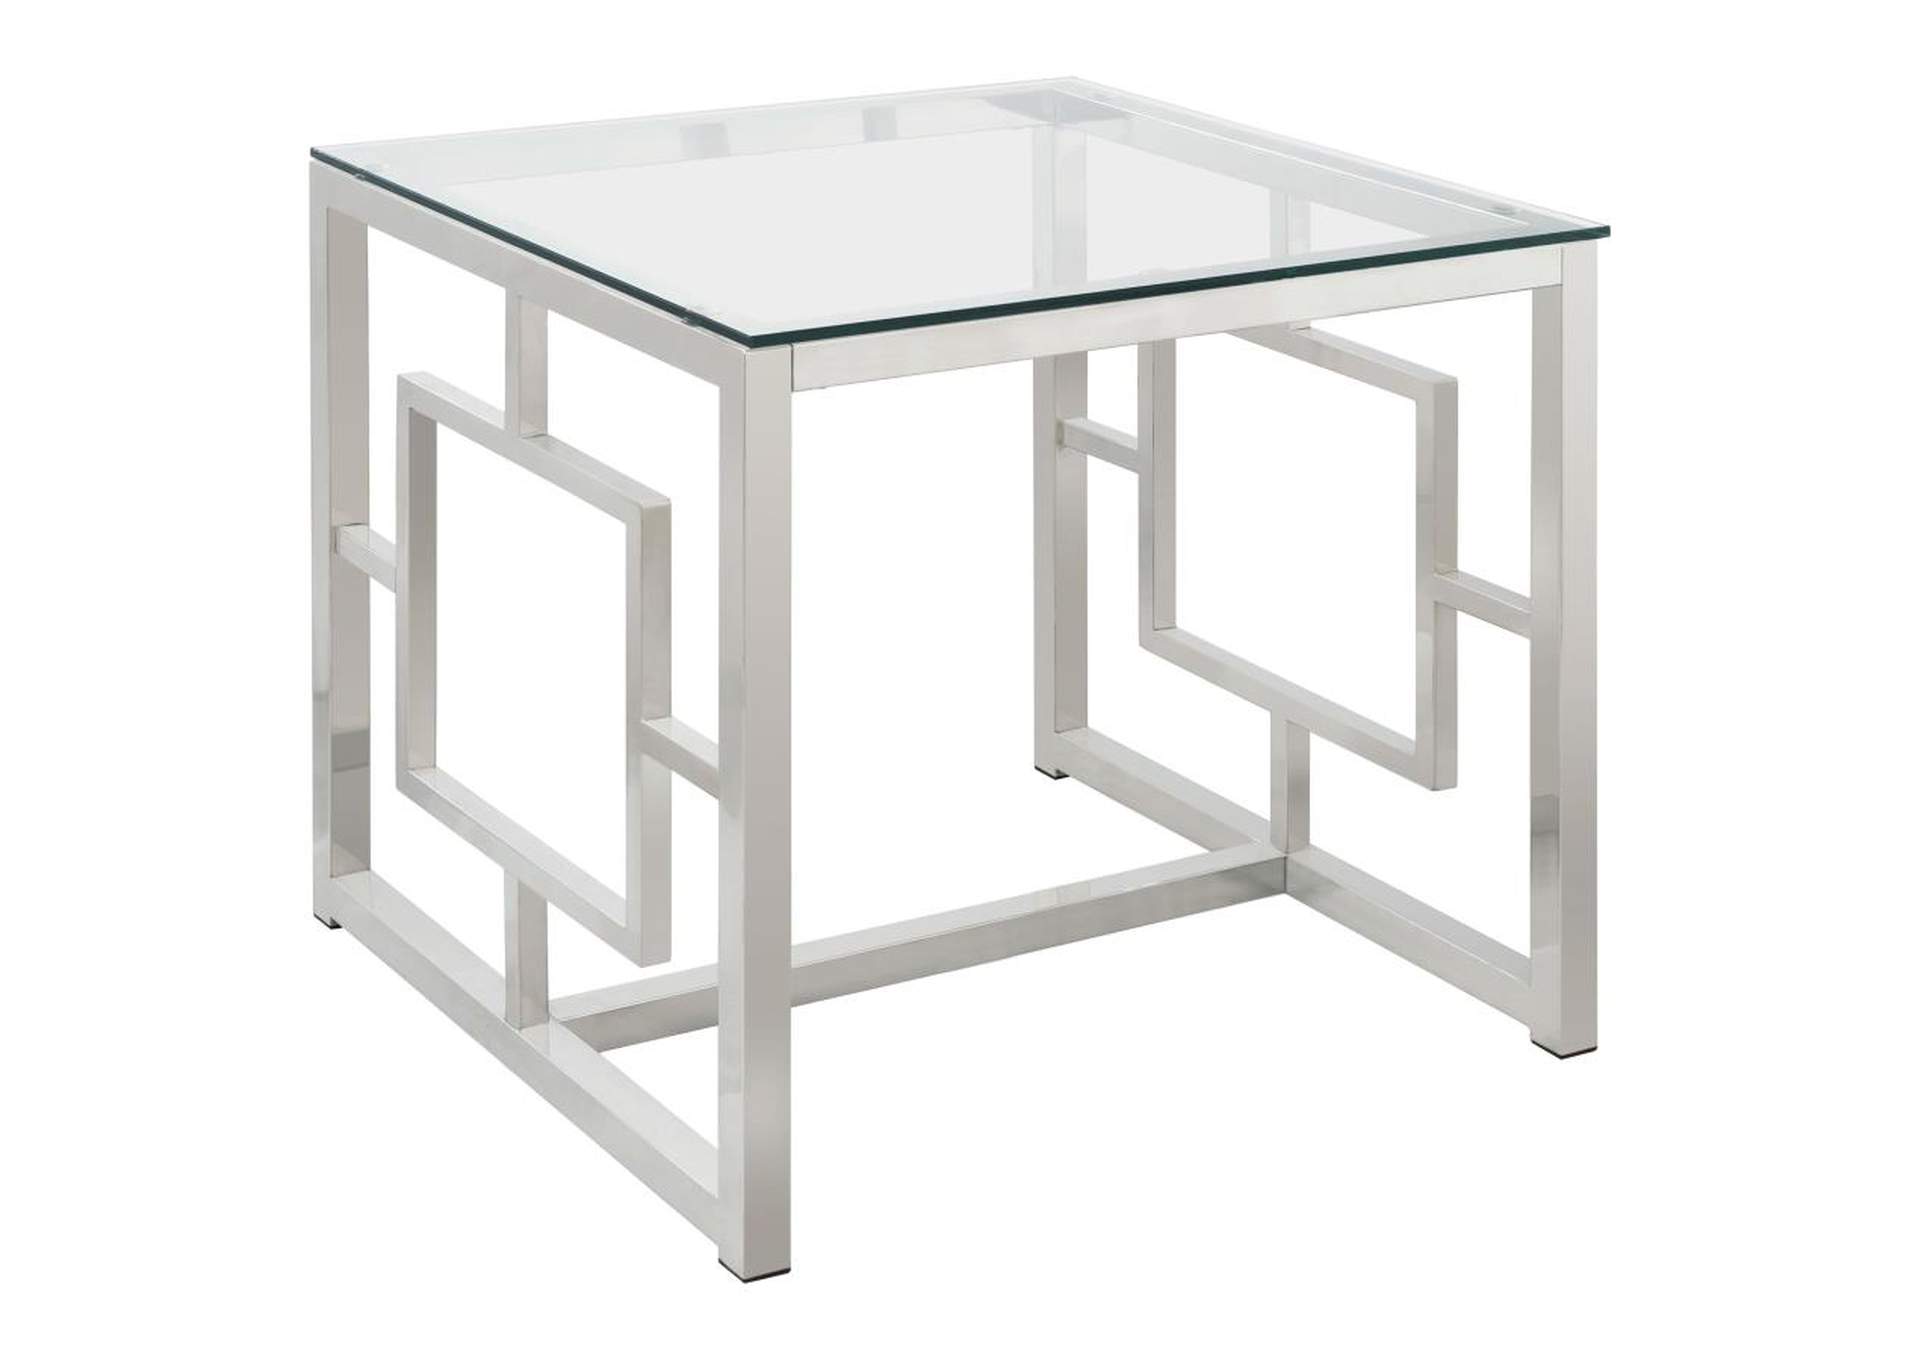 Merced Square Tempered Glass Top End Table Nickel,Coaster Furniture